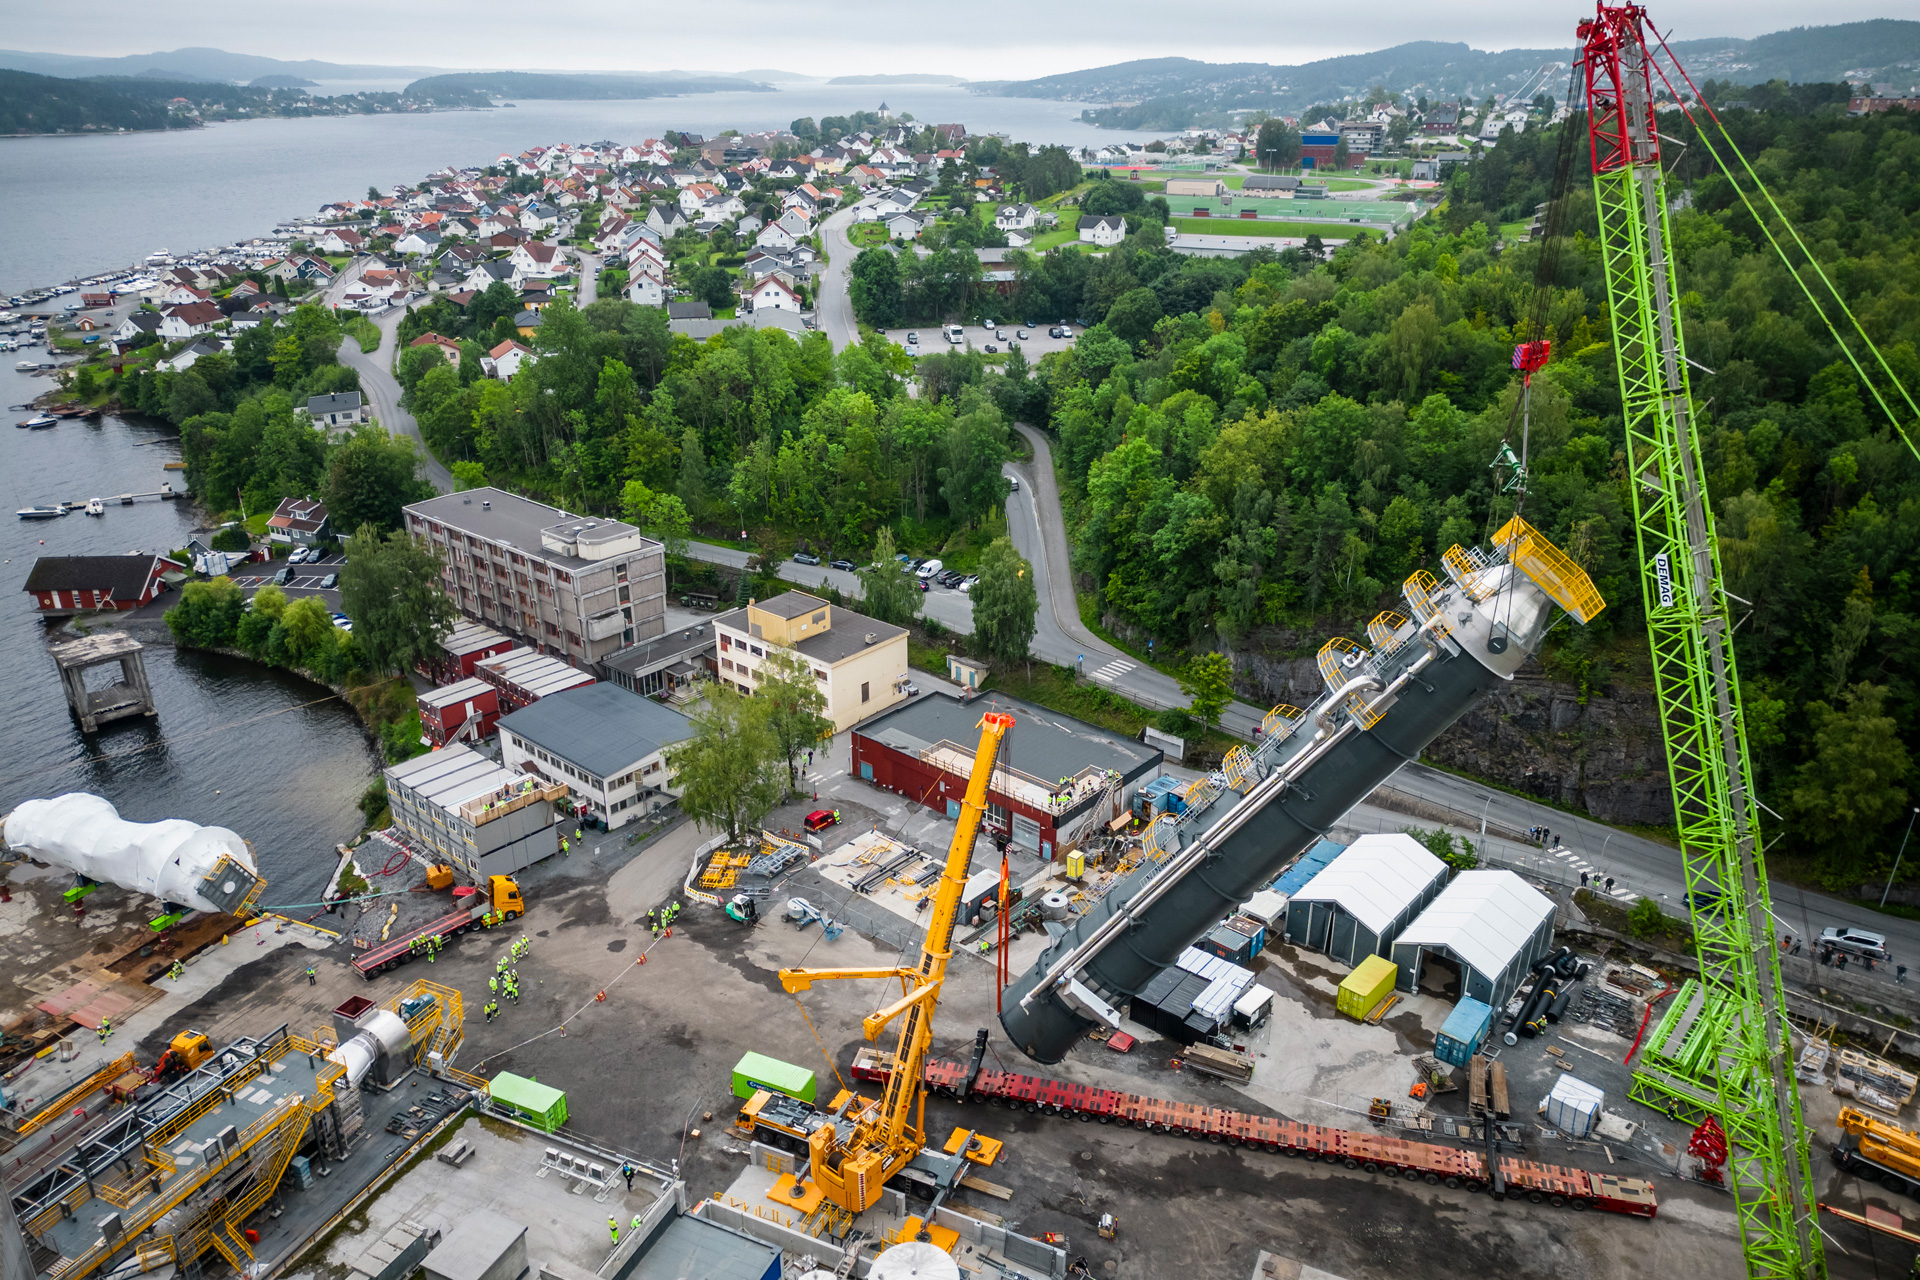 Aerial view of a cement plant with a large crane near a body of water, with residential areas in the background.